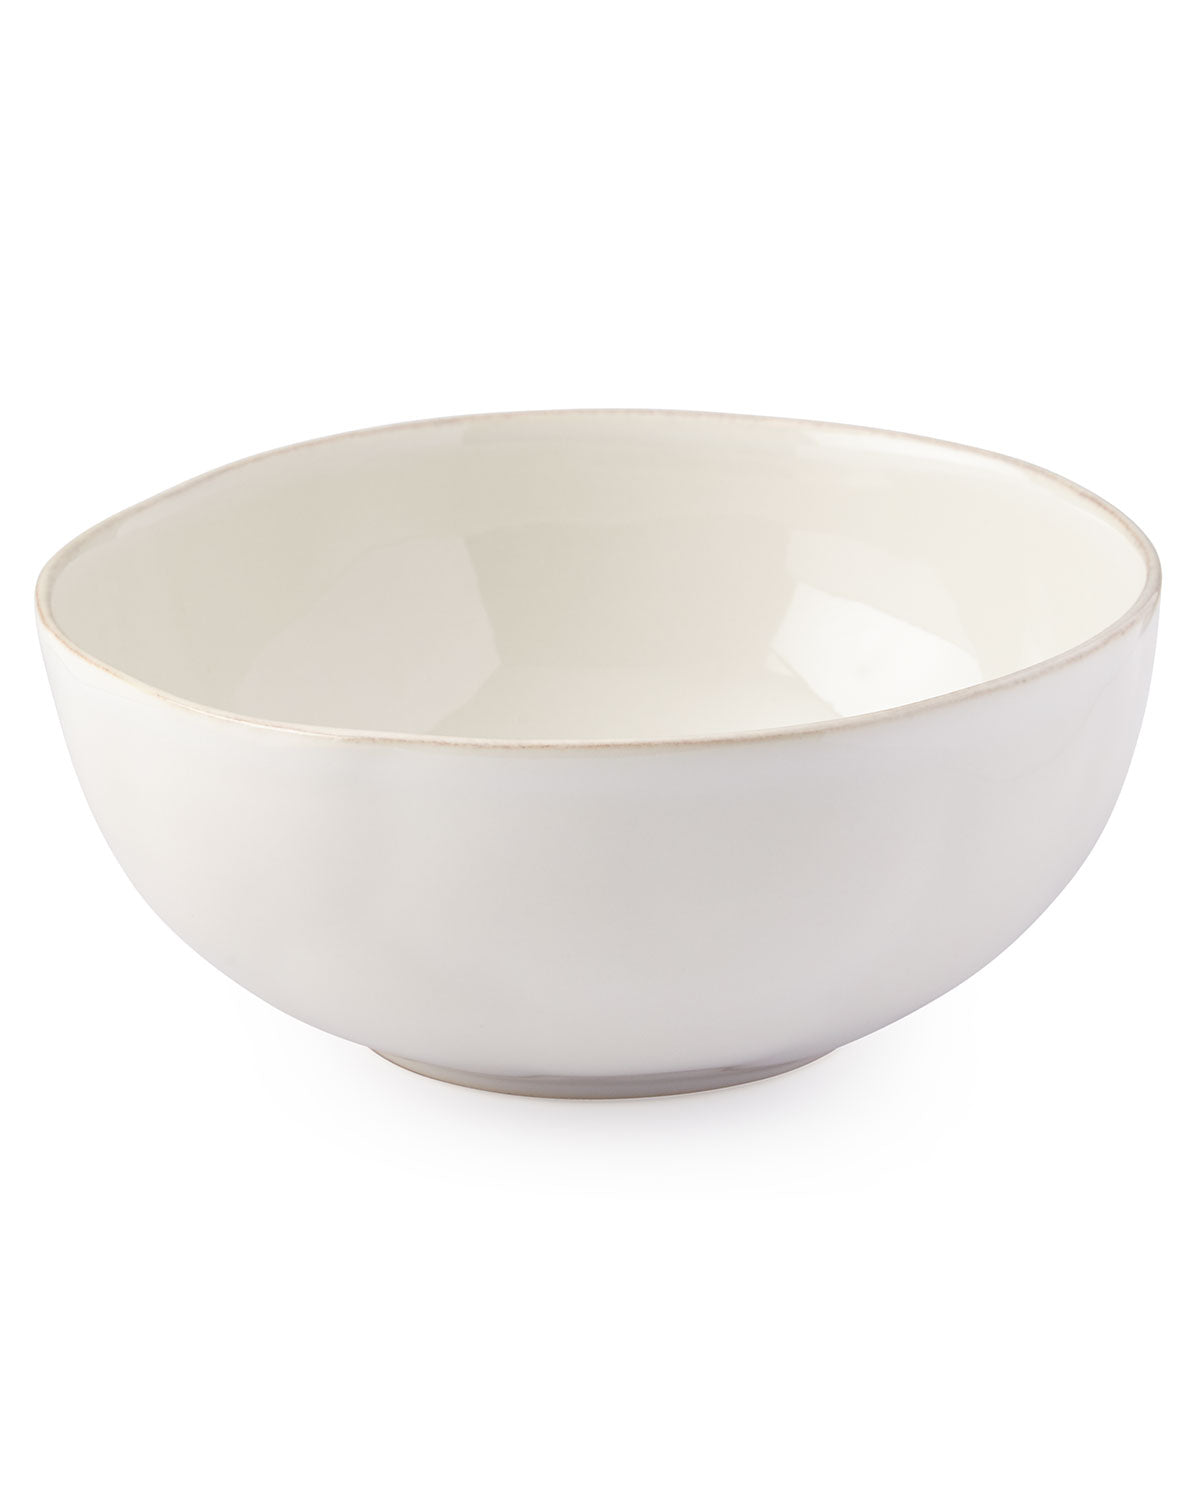 angled view of the puro cereal bowl on a white background